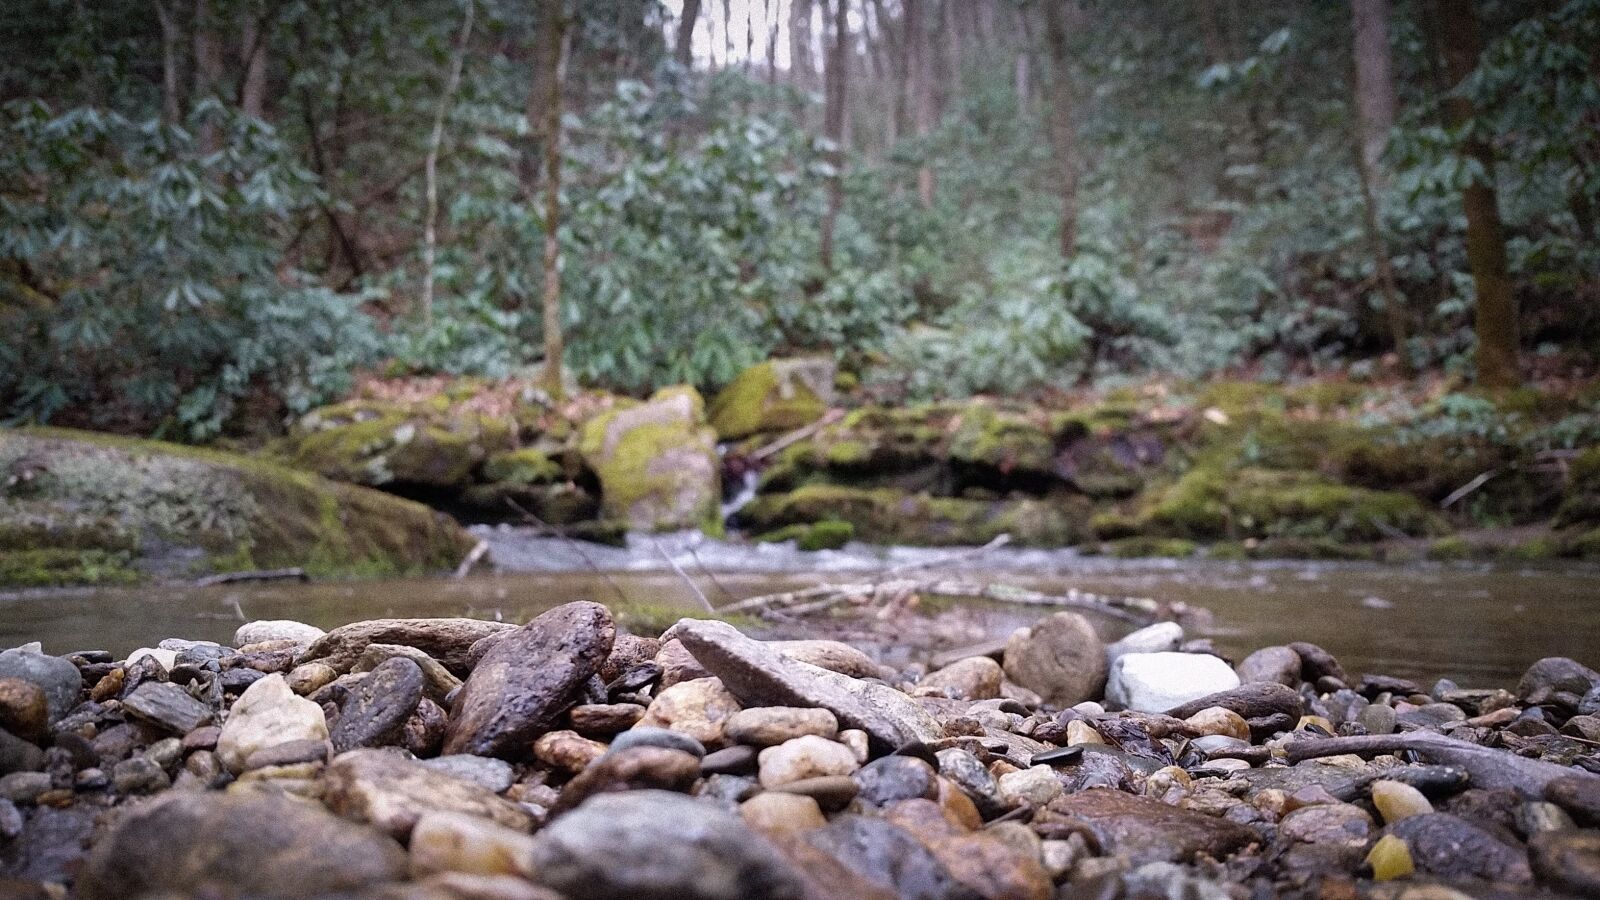 Samsung Galaxy S5 sample photo. Creek, stones, forest photography